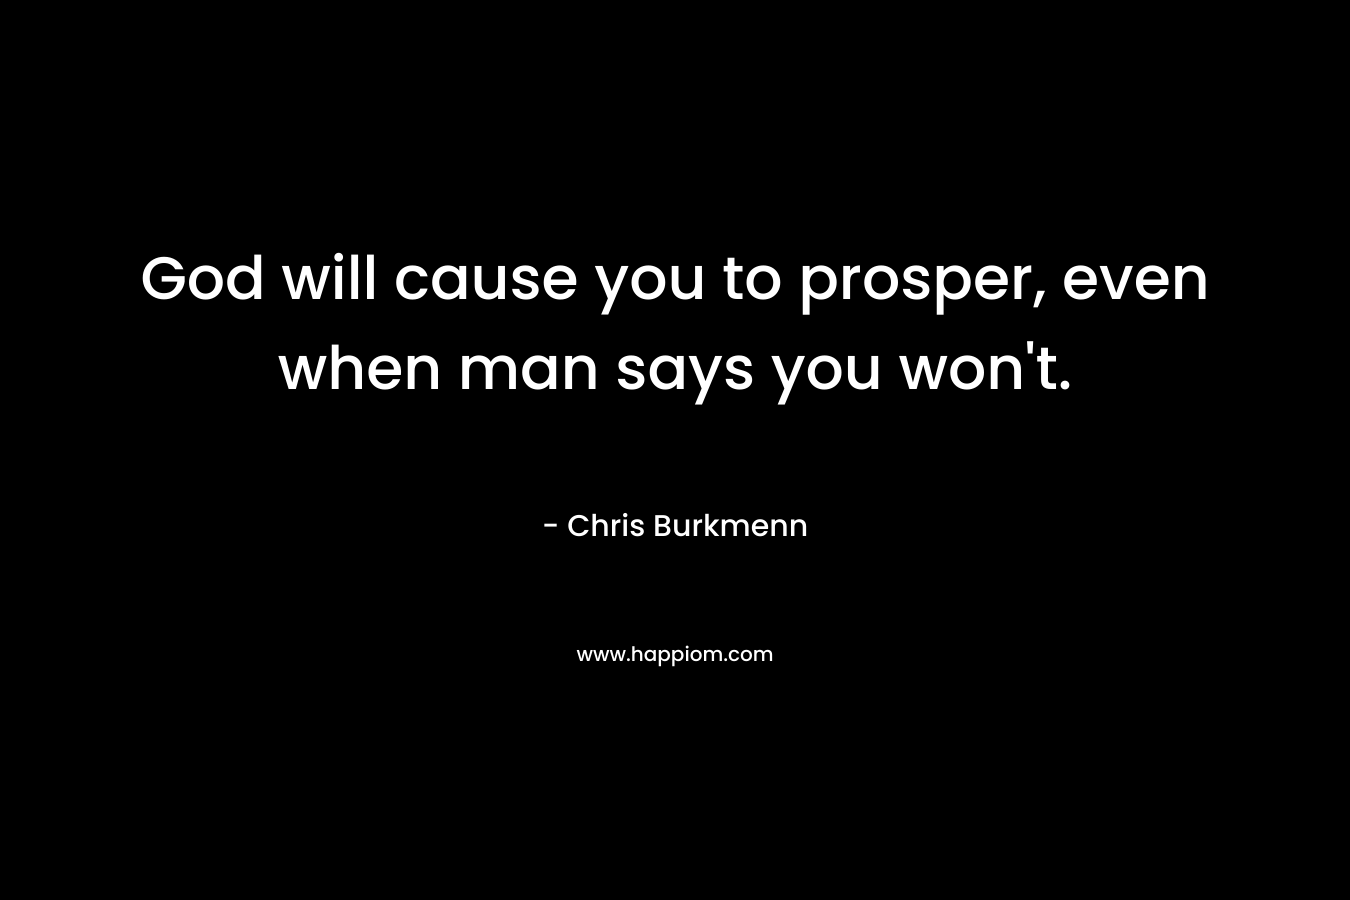 God will cause you to prosper, even when man says you won't.